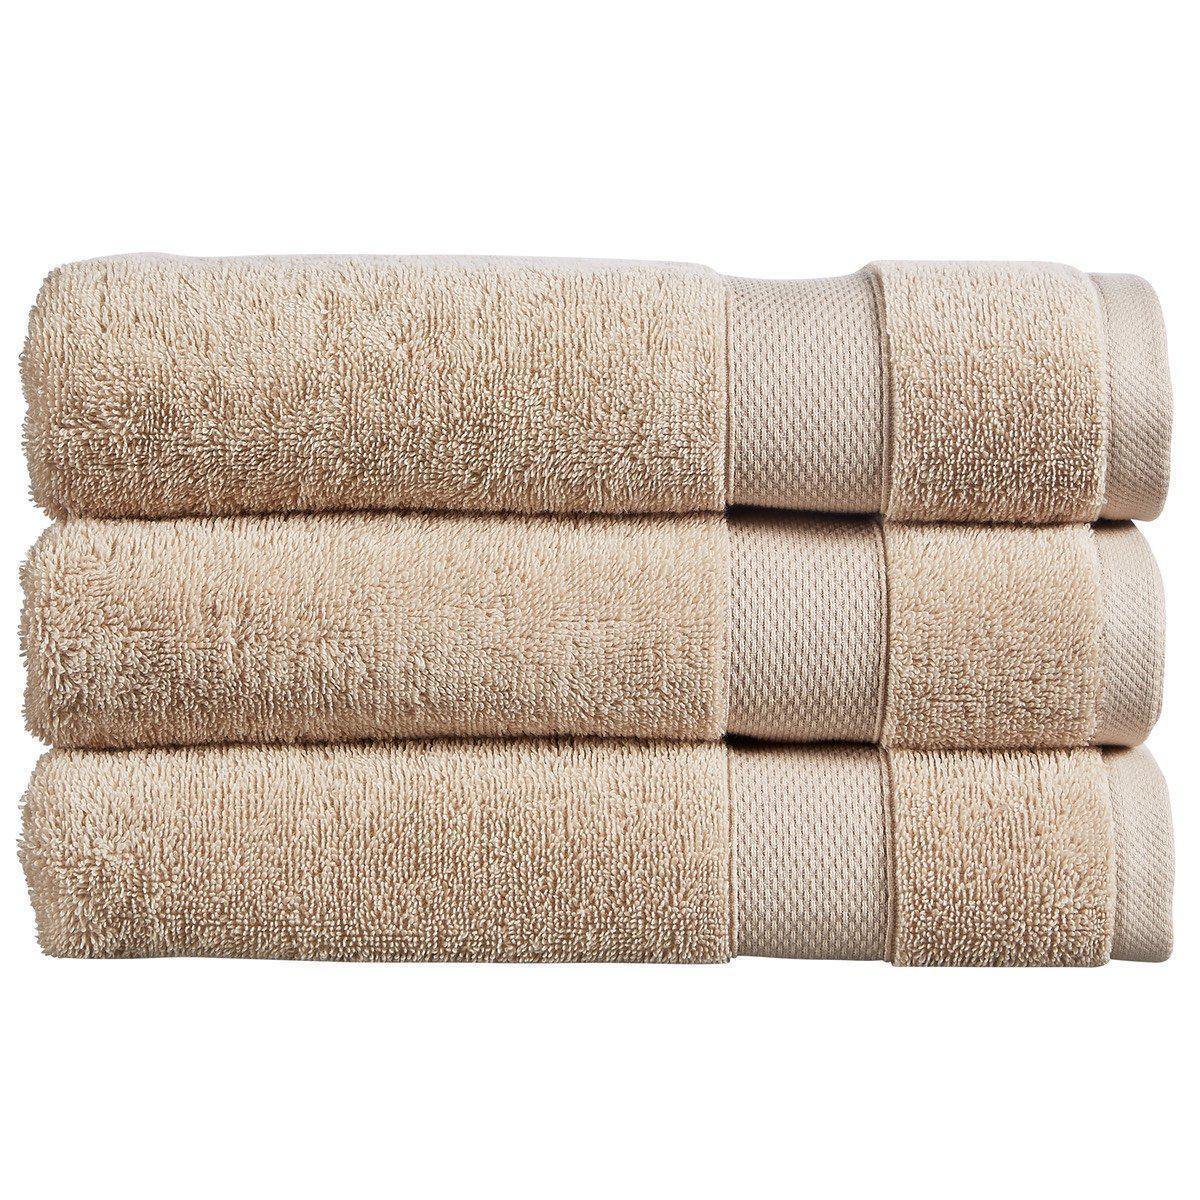 Christy Refresh Combed Cotton Towel - Driftwood-Williamsons Factory Shop